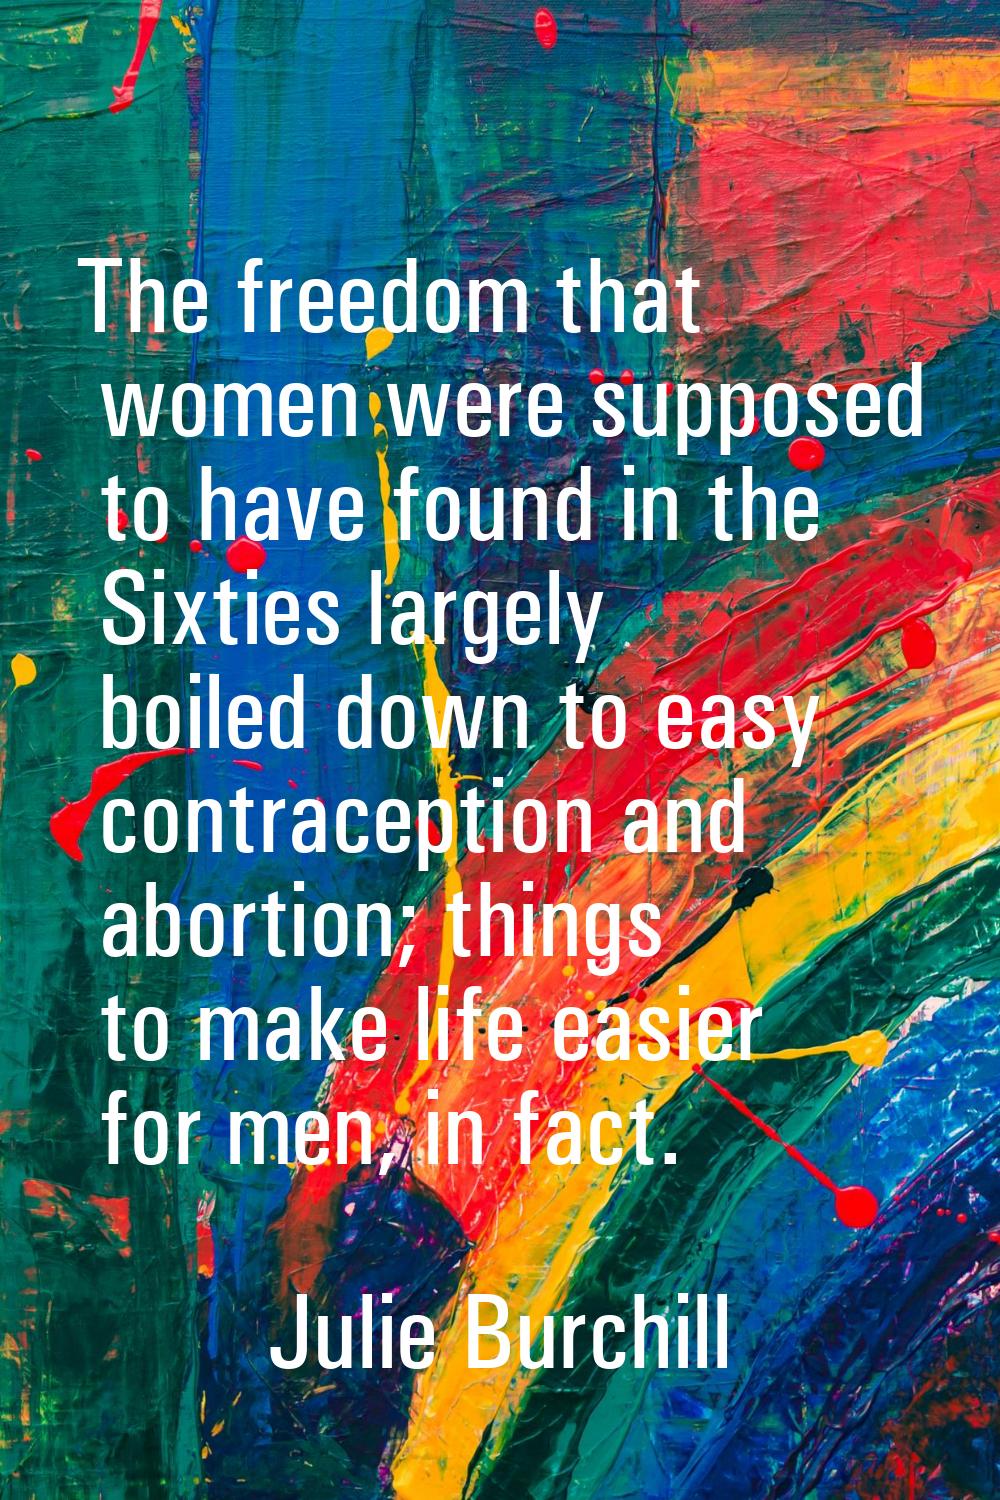 The freedom that women were supposed to have found in the Sixties largely boiled down to easy contr